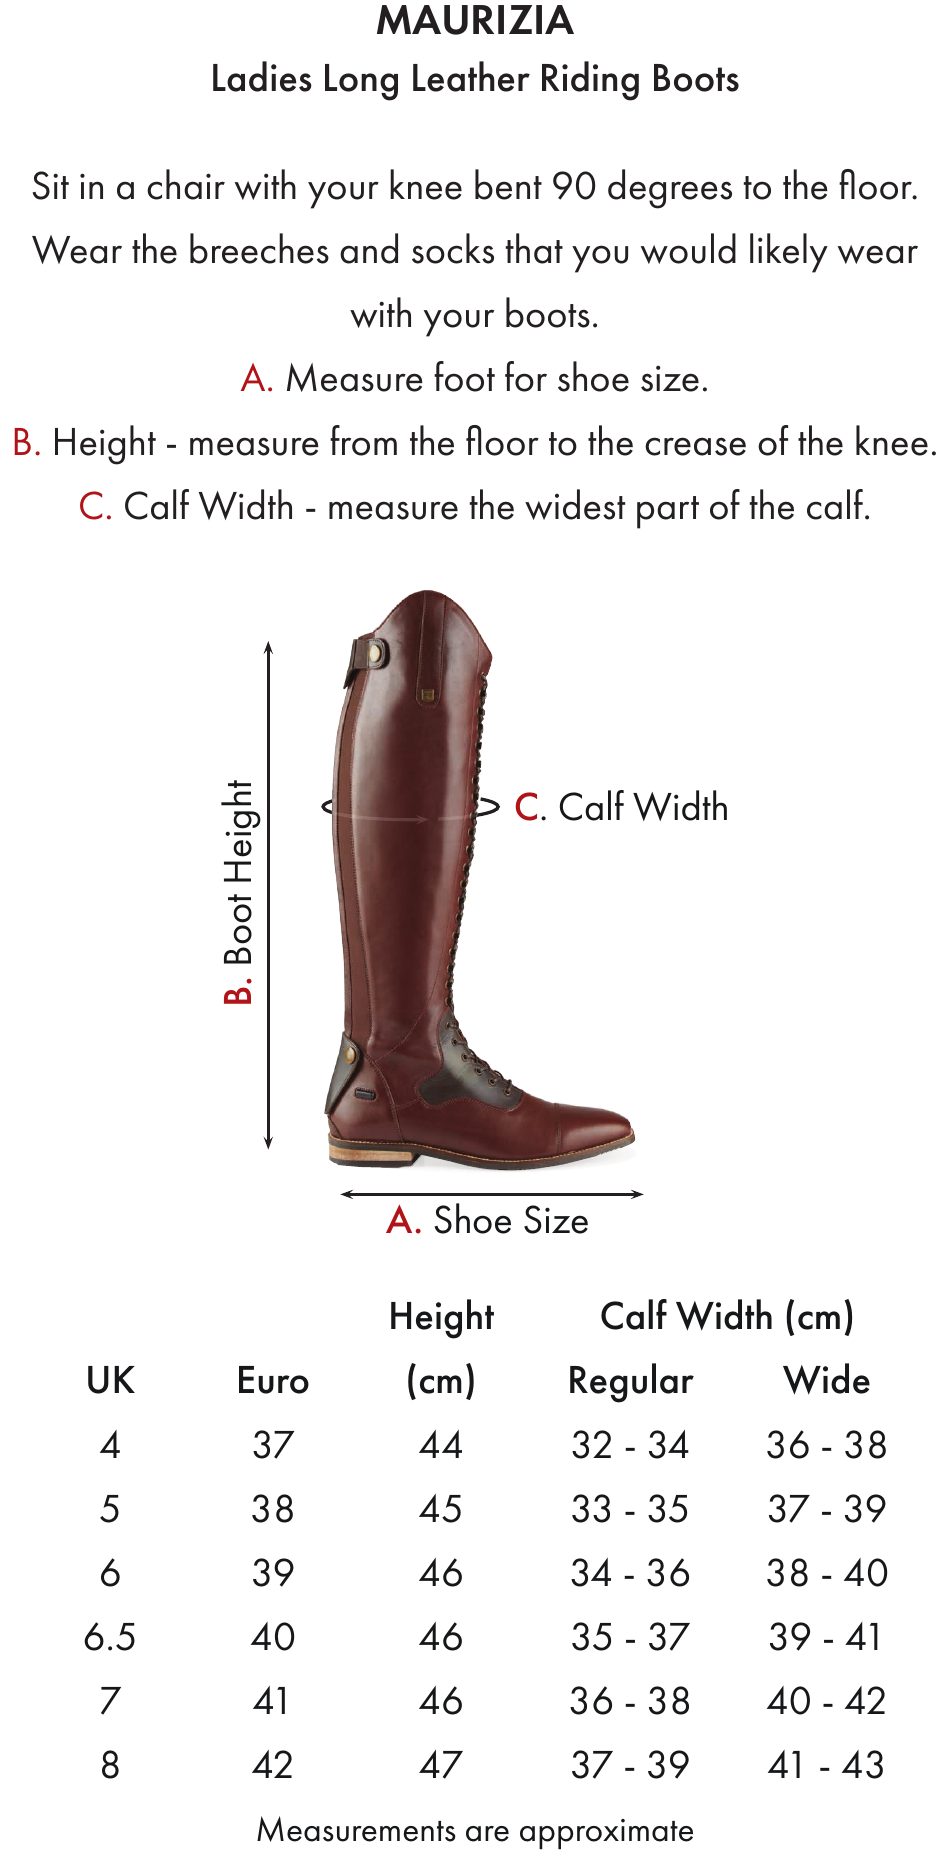 Ladies Long Leather Riding Boots Size Chart, Page 1